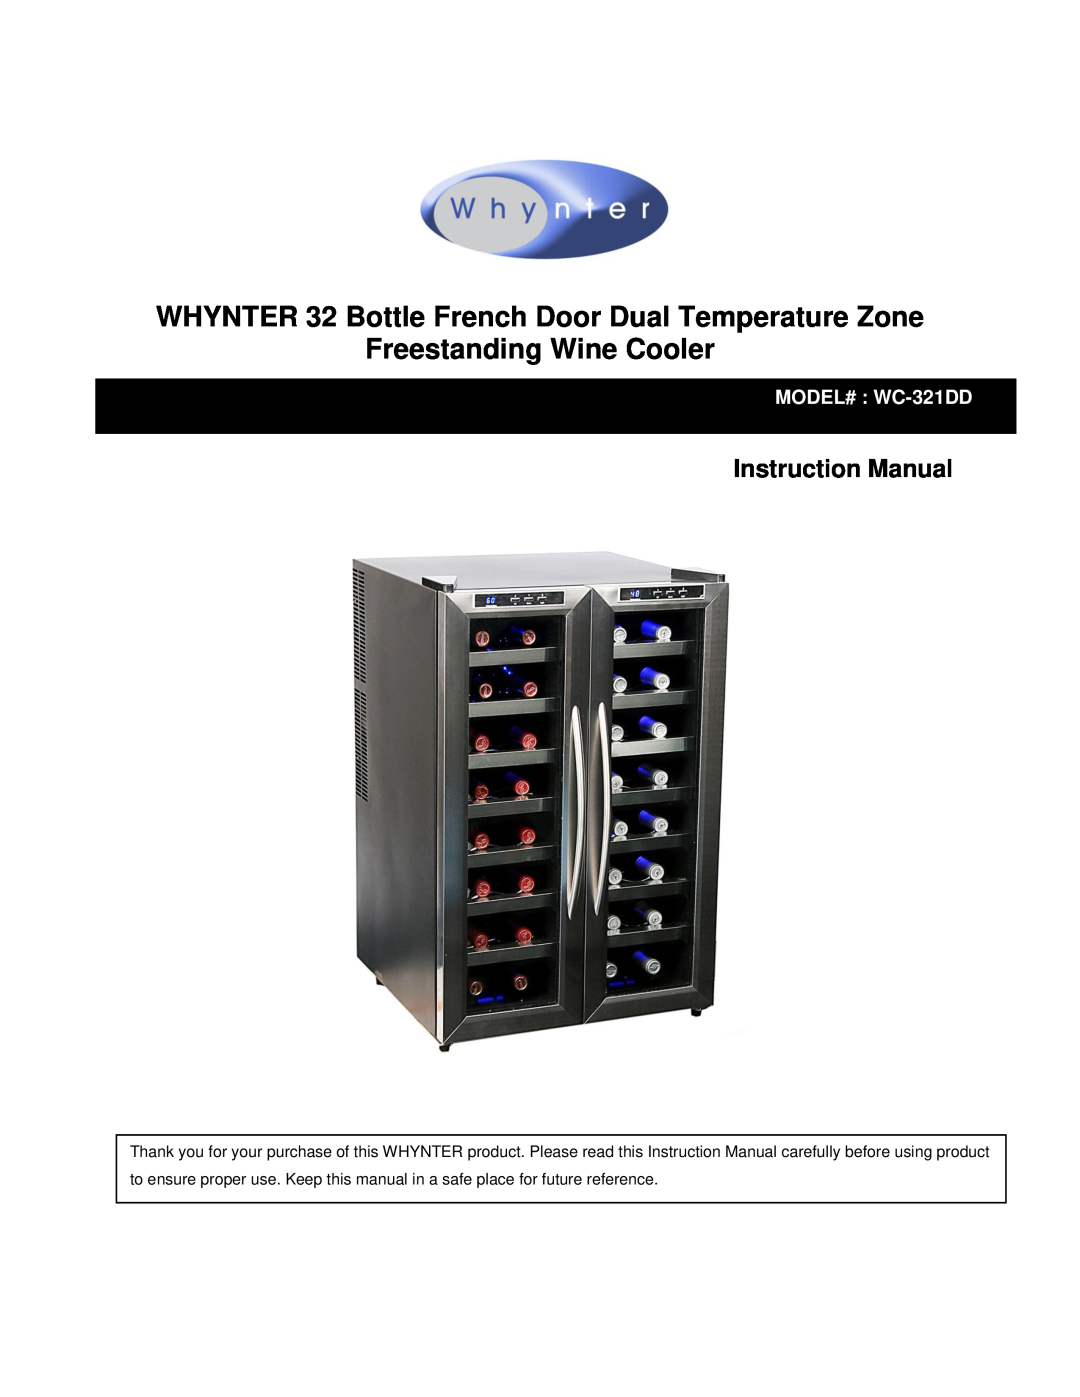 Whynter instruction manual WHYNTER 32 Bottle French Door Dual Temperature Zone Wine Cooler, MODEL# WC-321DD 